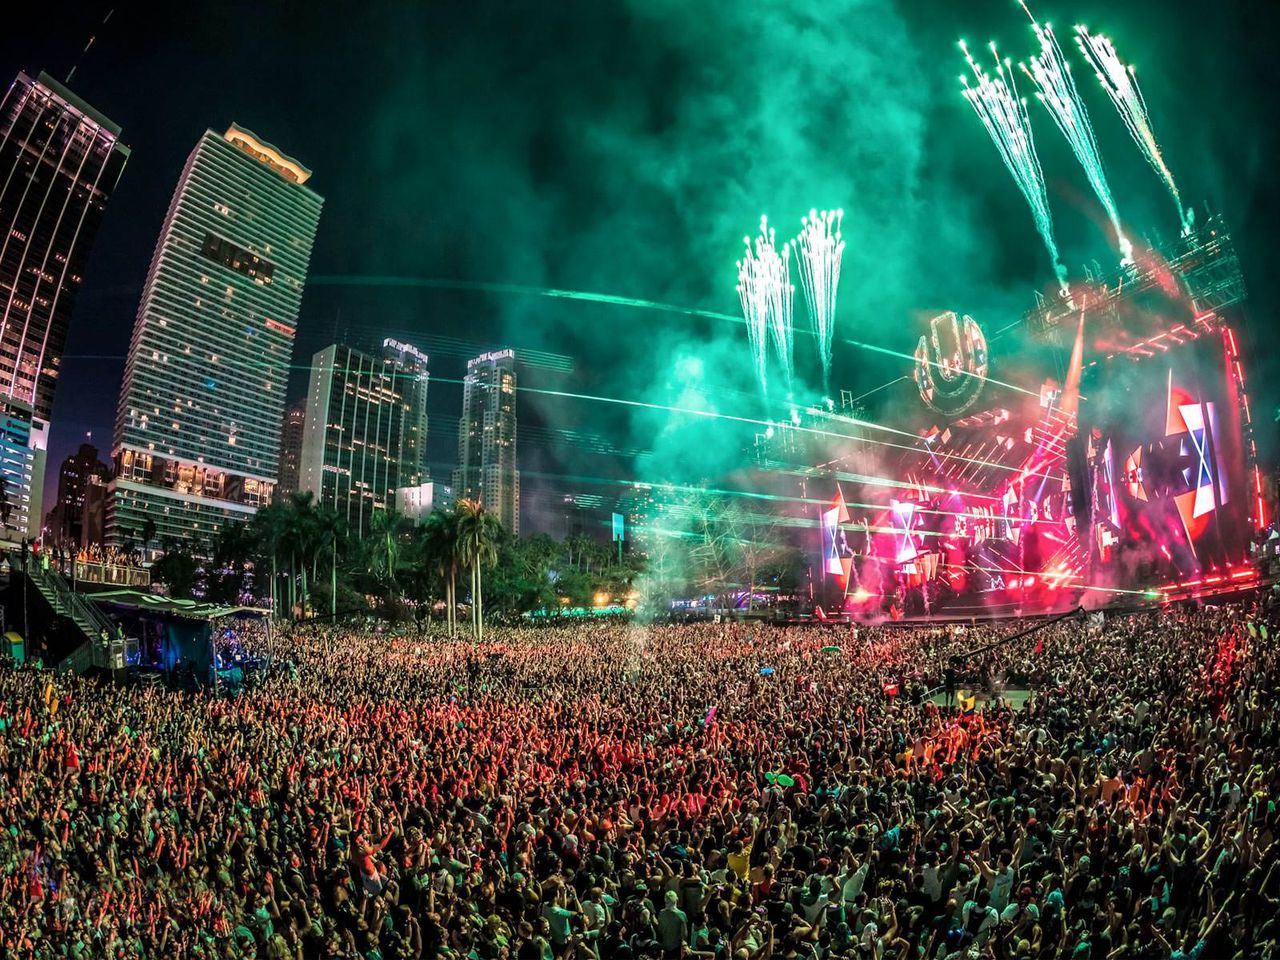 Miami's Ultra Music Festival is the first of major US music events to be canceled due to the coronavirus outbreak. Image via OZ EDM.